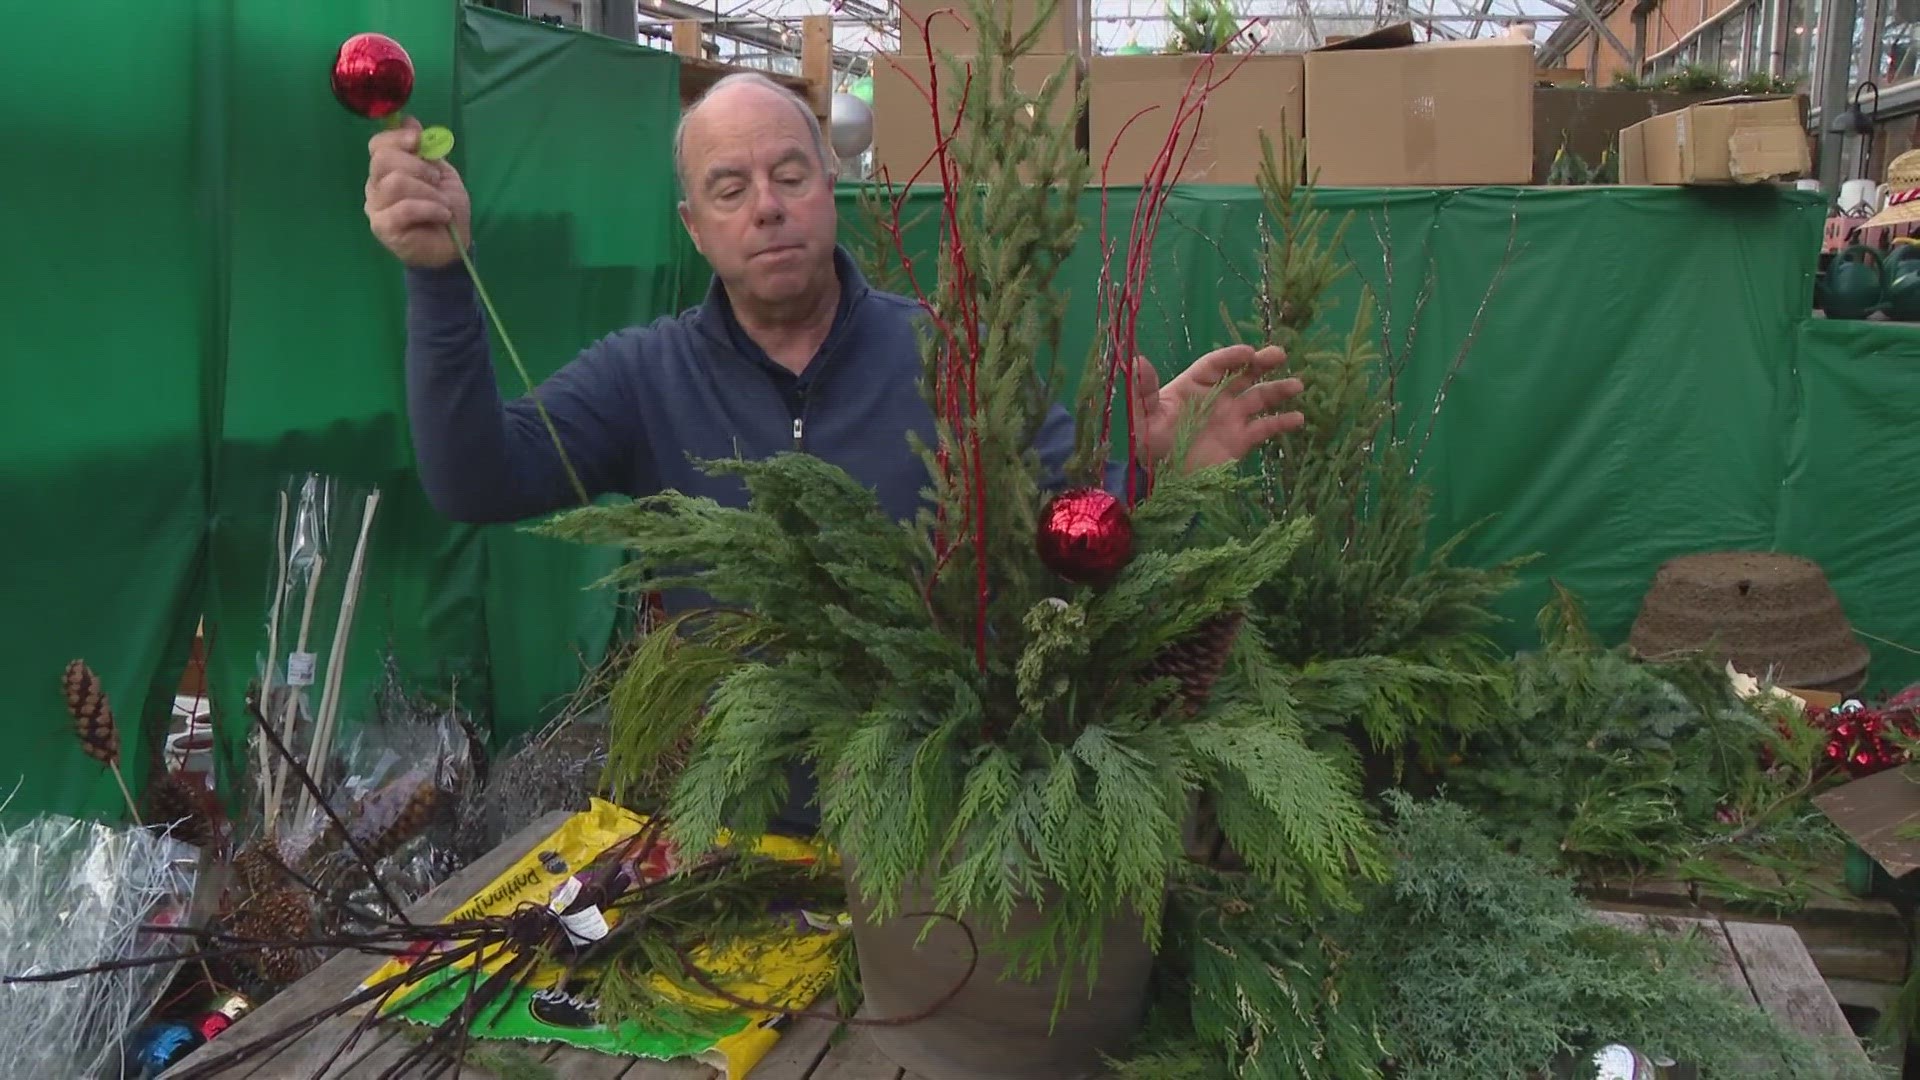 Pat Sullivan joined 13Sunrise to share his tips for making your own porch planter for the holidays.